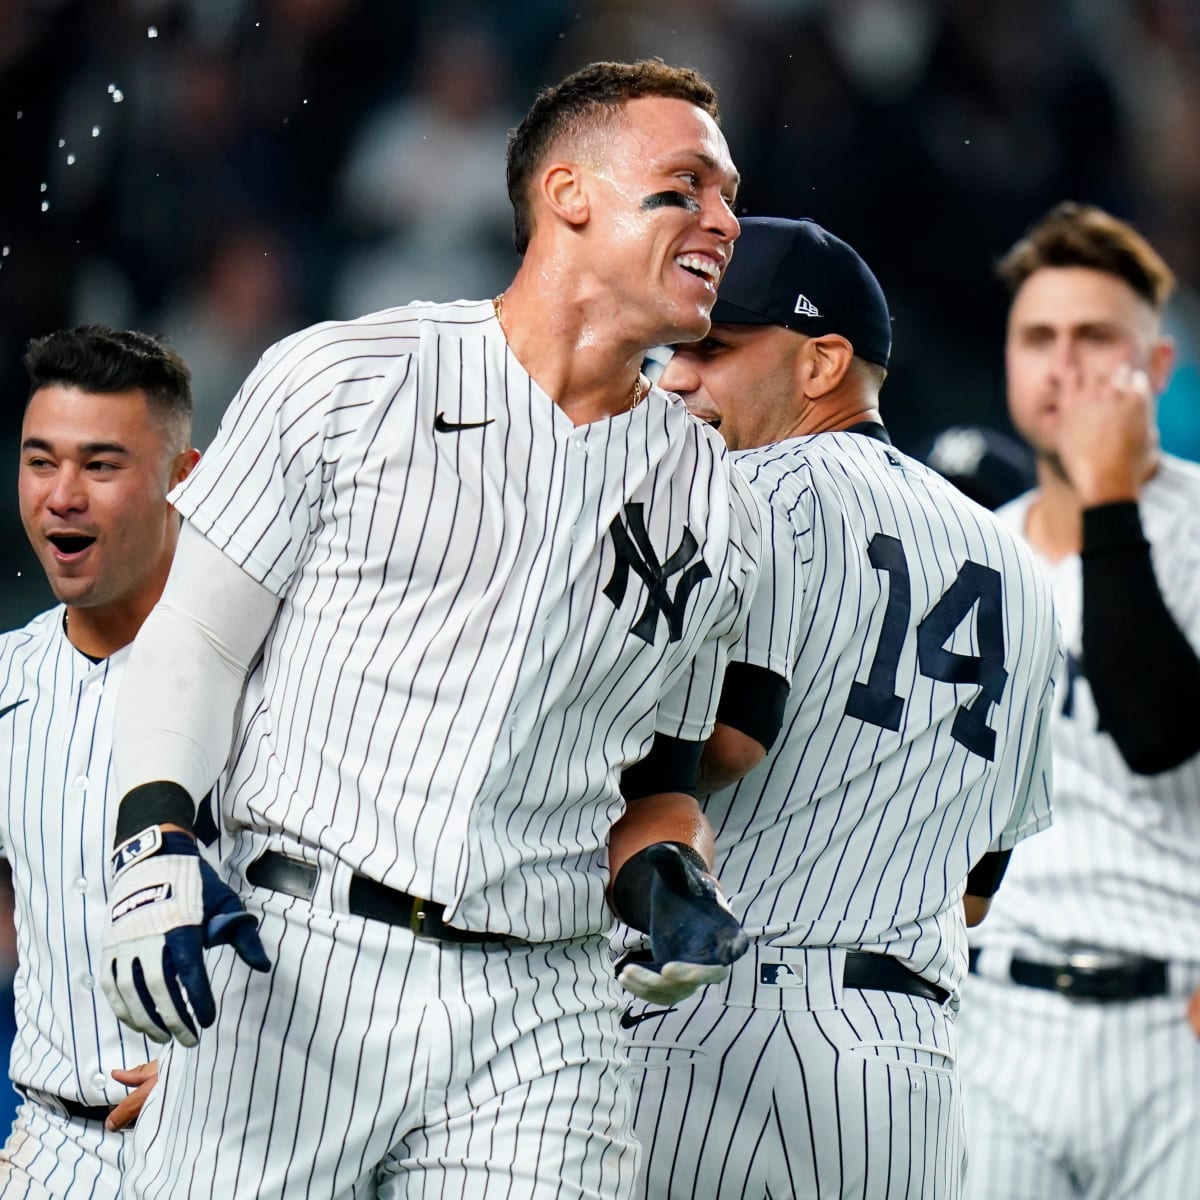 New York Yankees team history and facts